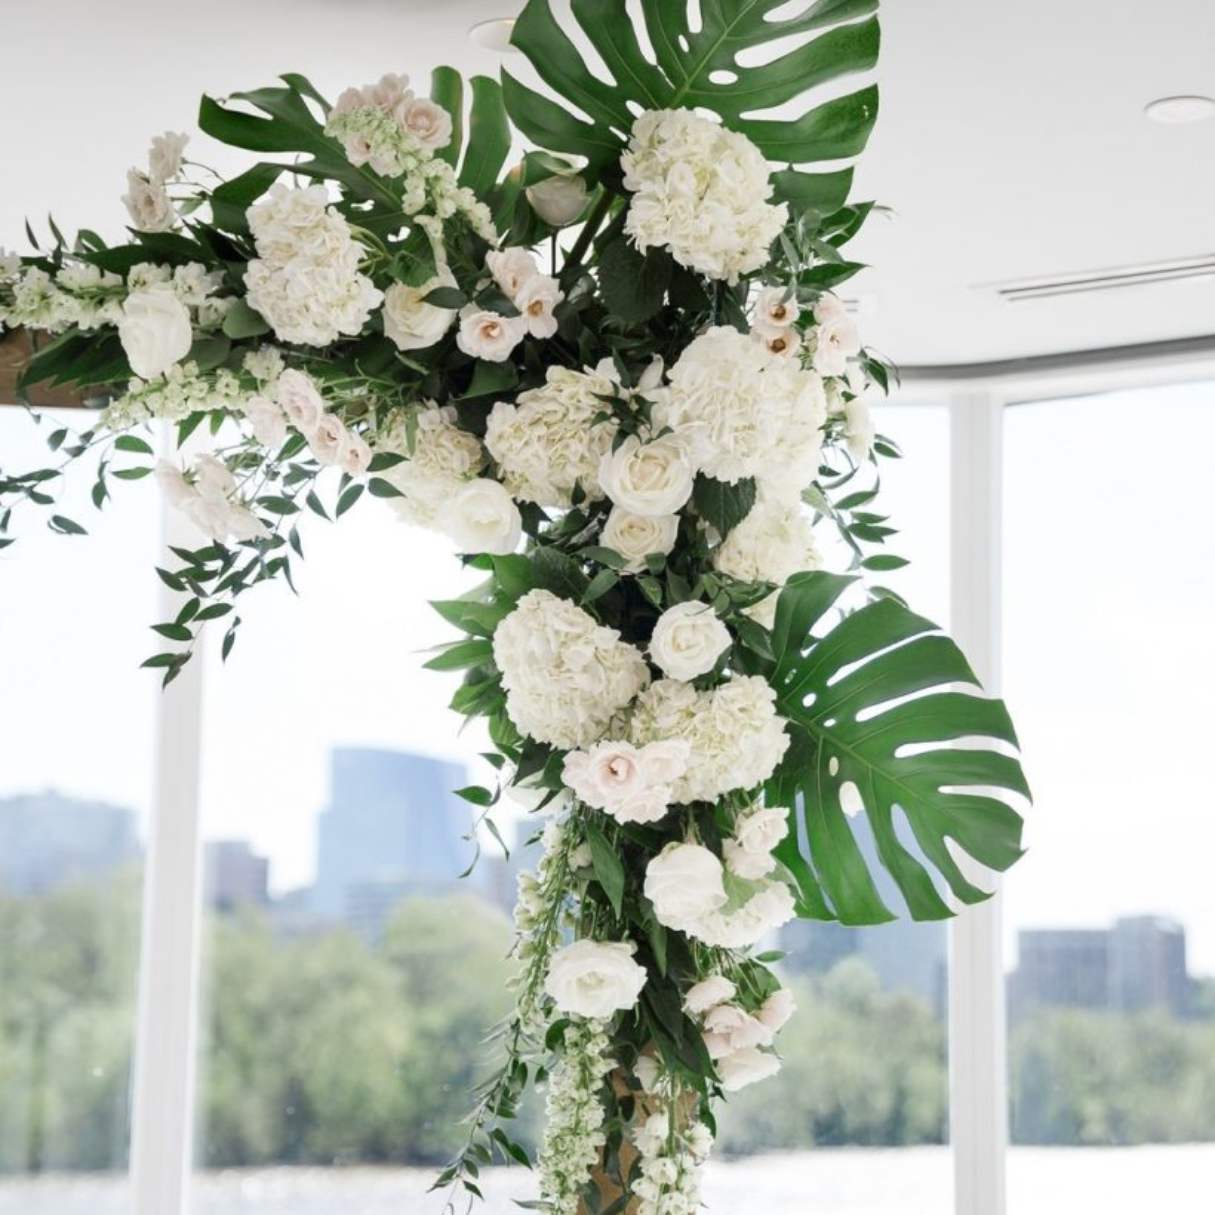 What Are The Big Leaves In Floral Arrangements Called